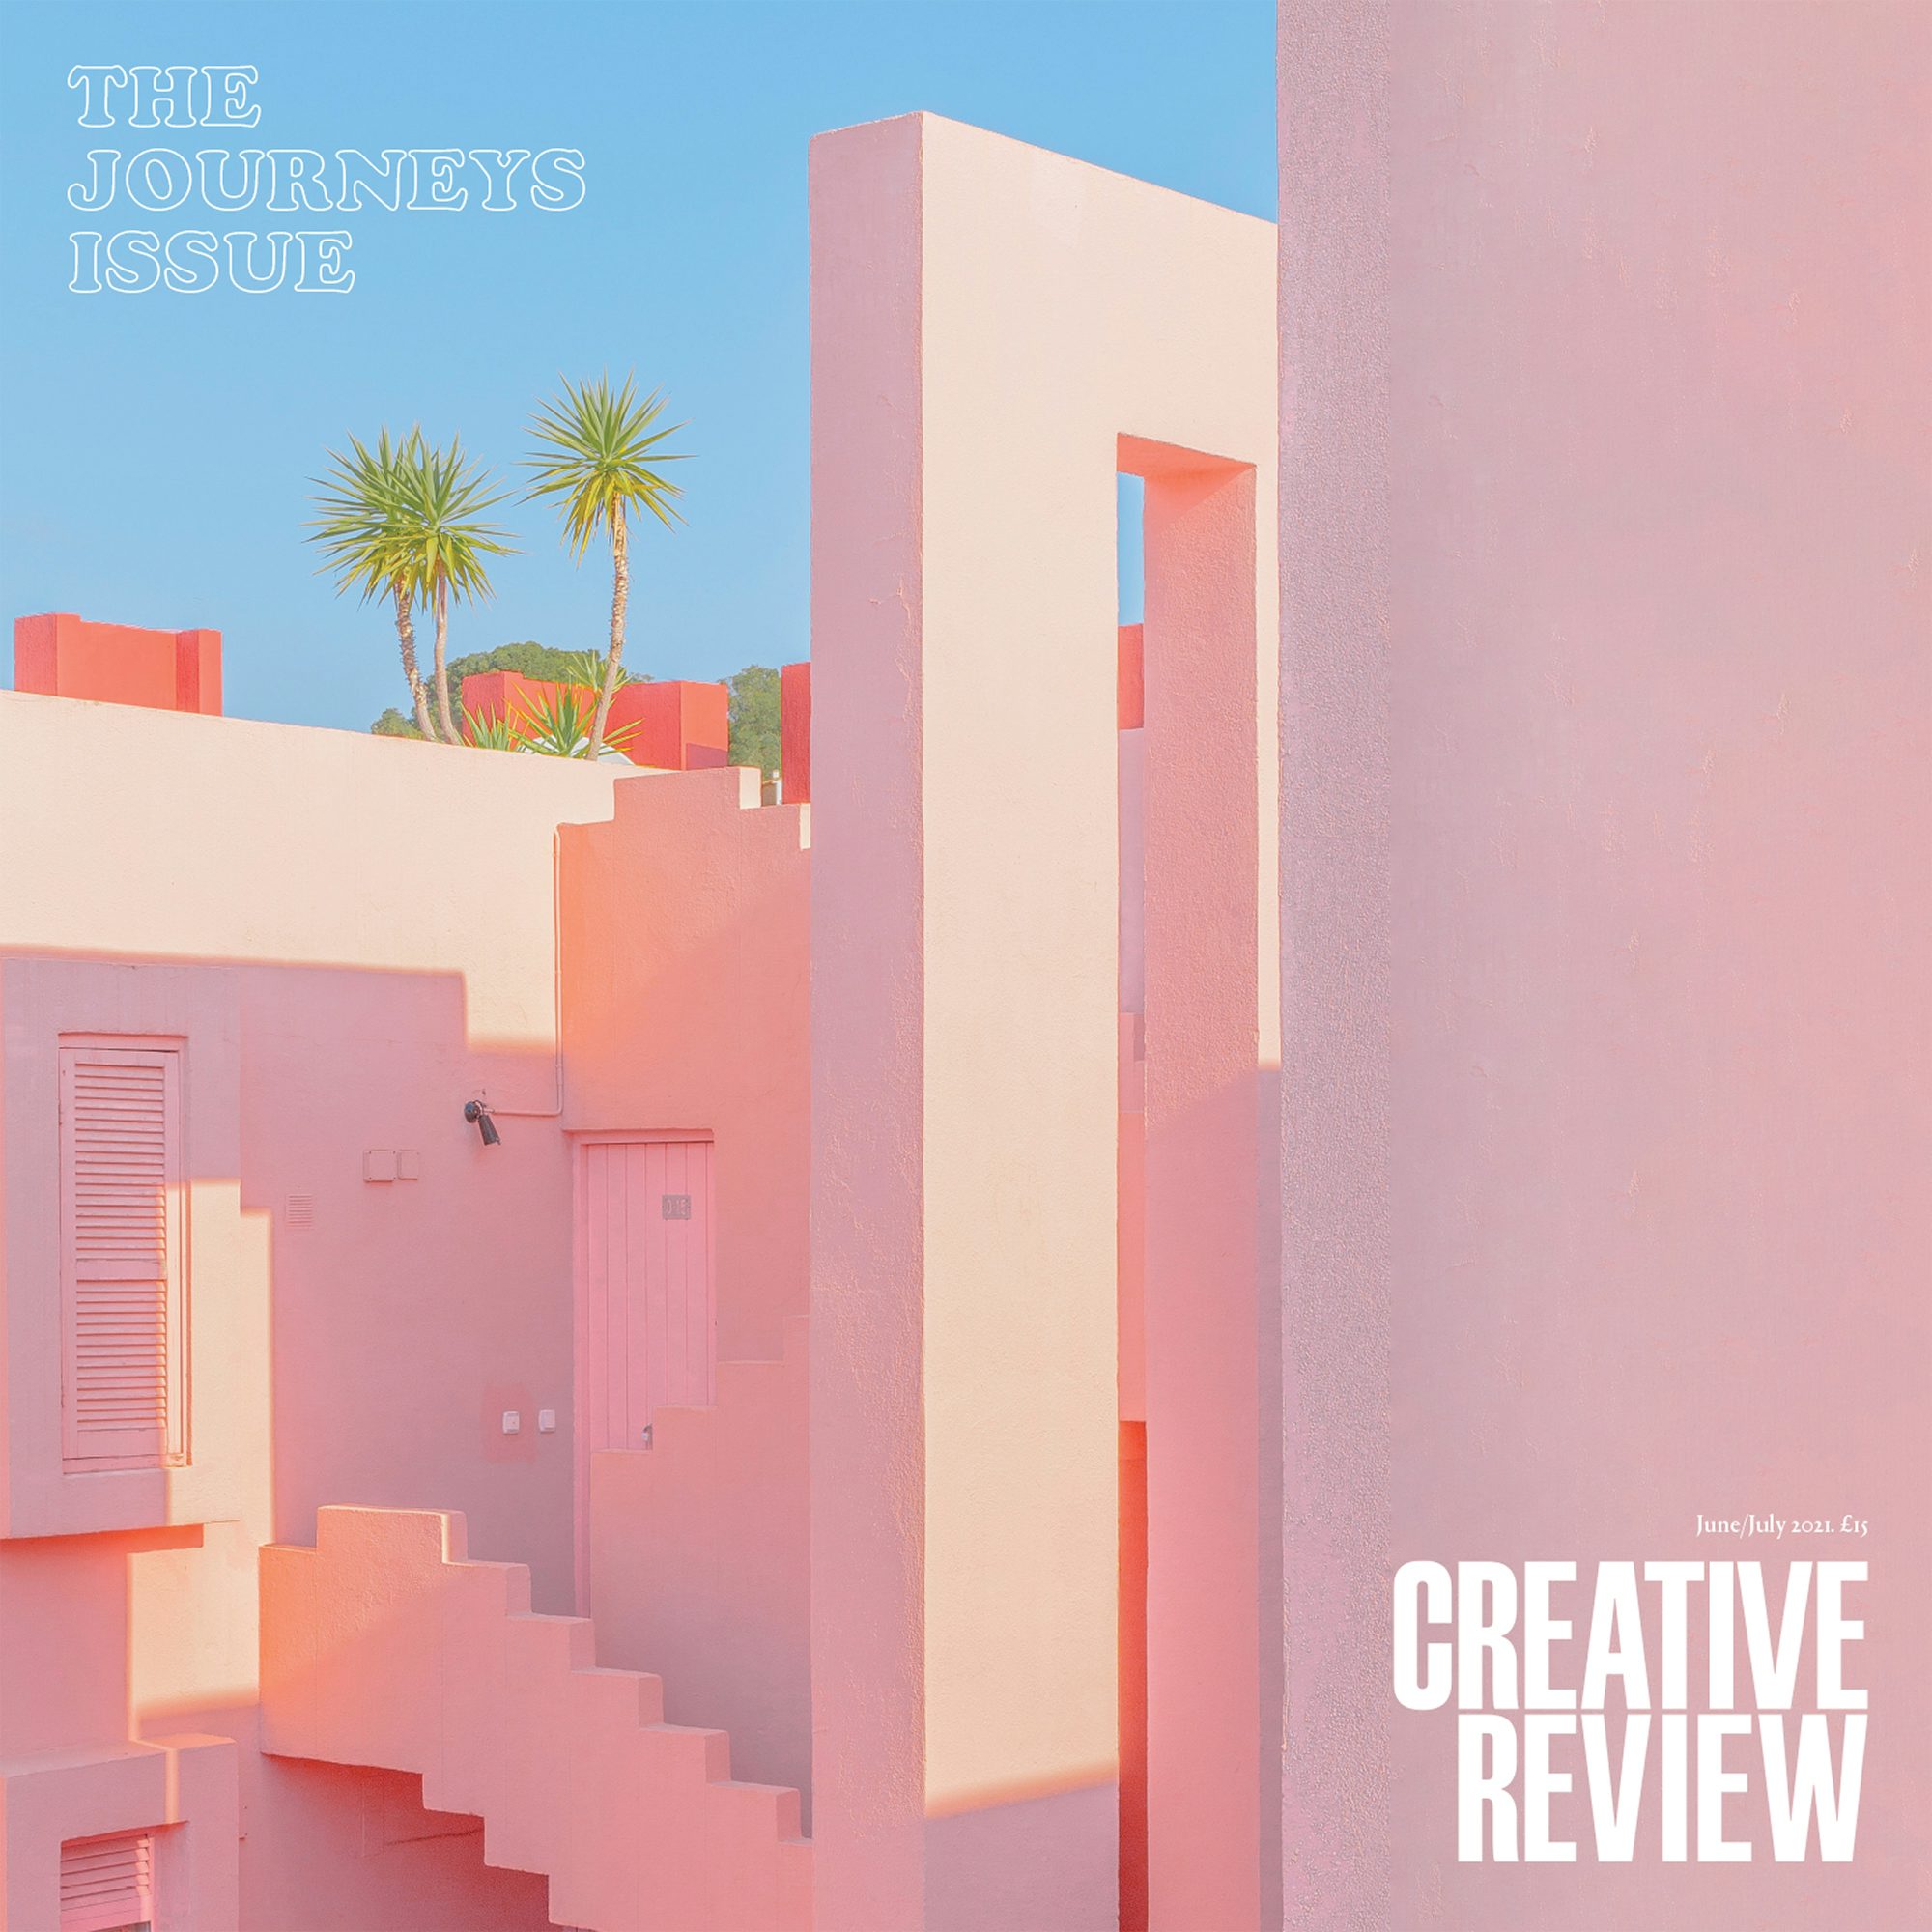 Creative Review Journeys issue cover